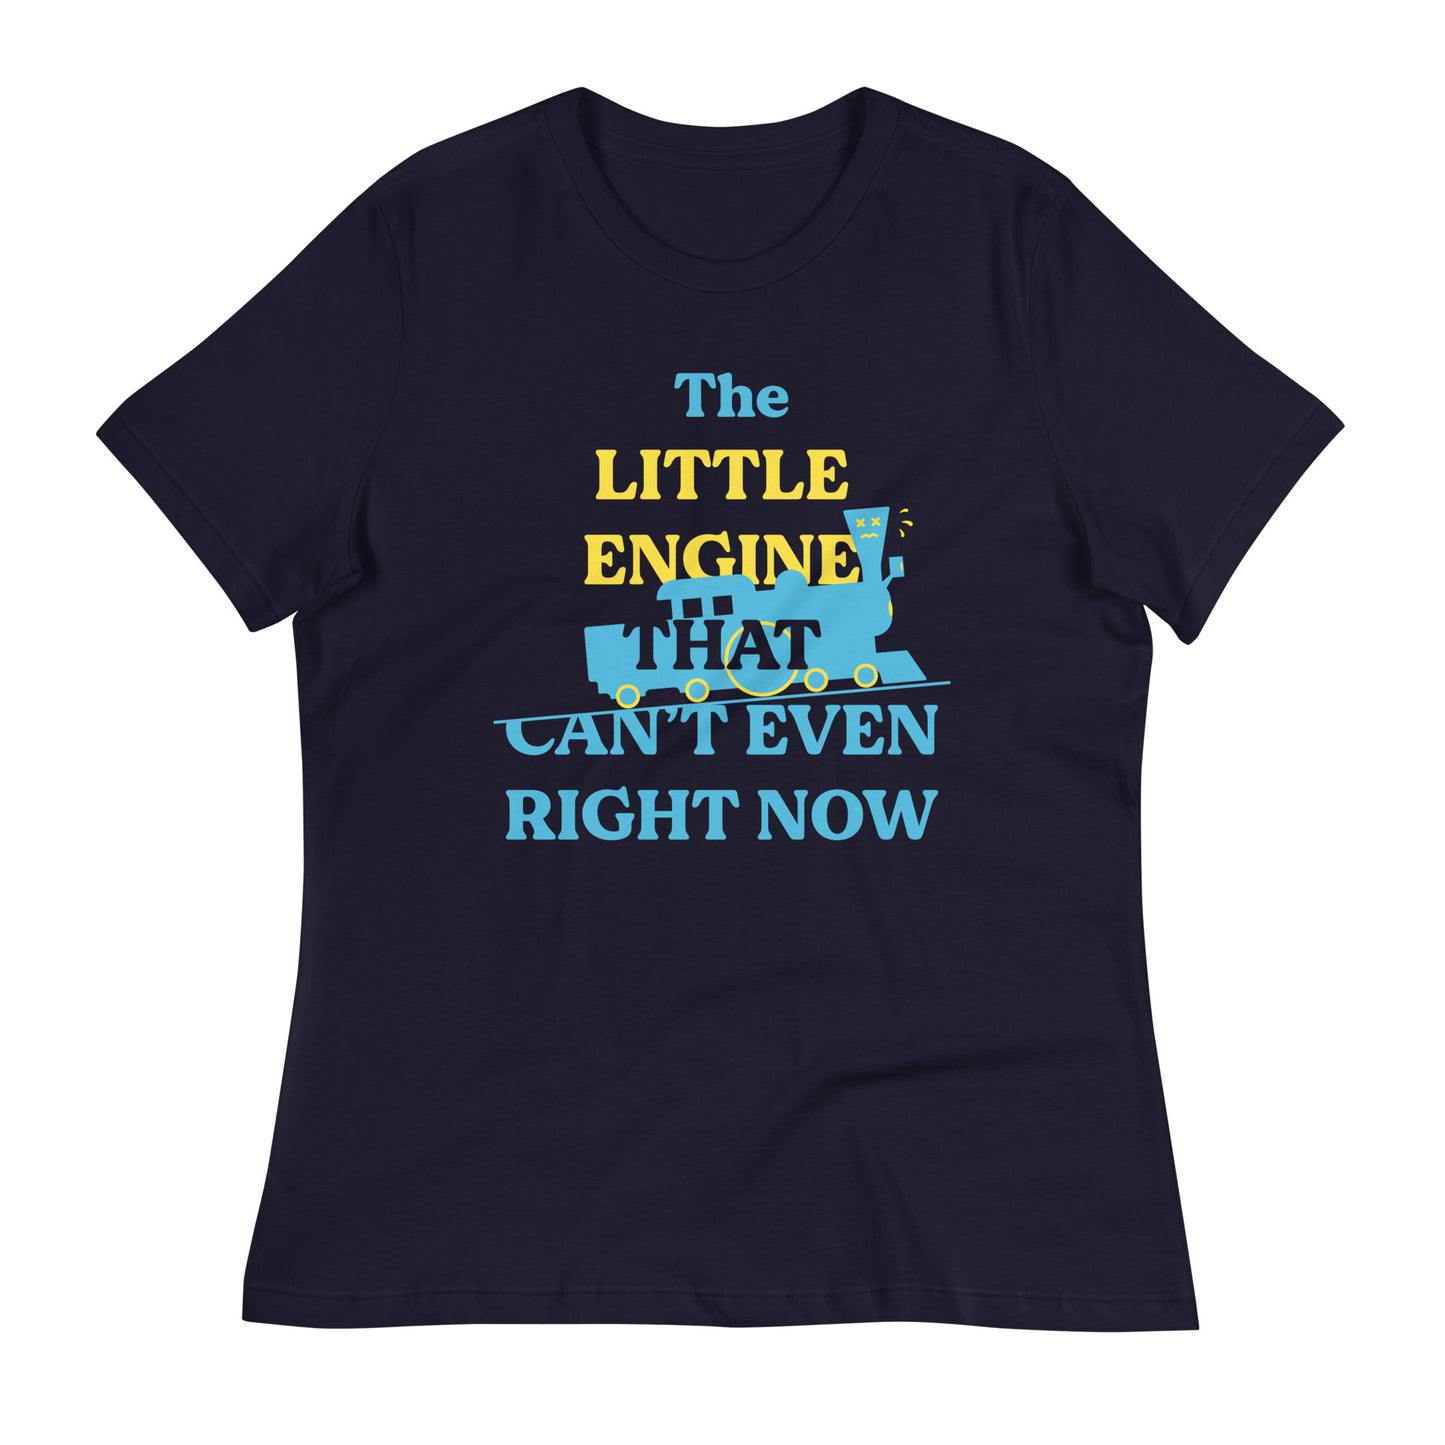 The Little Engine That Can't Even Right Now Women's Signature Tee